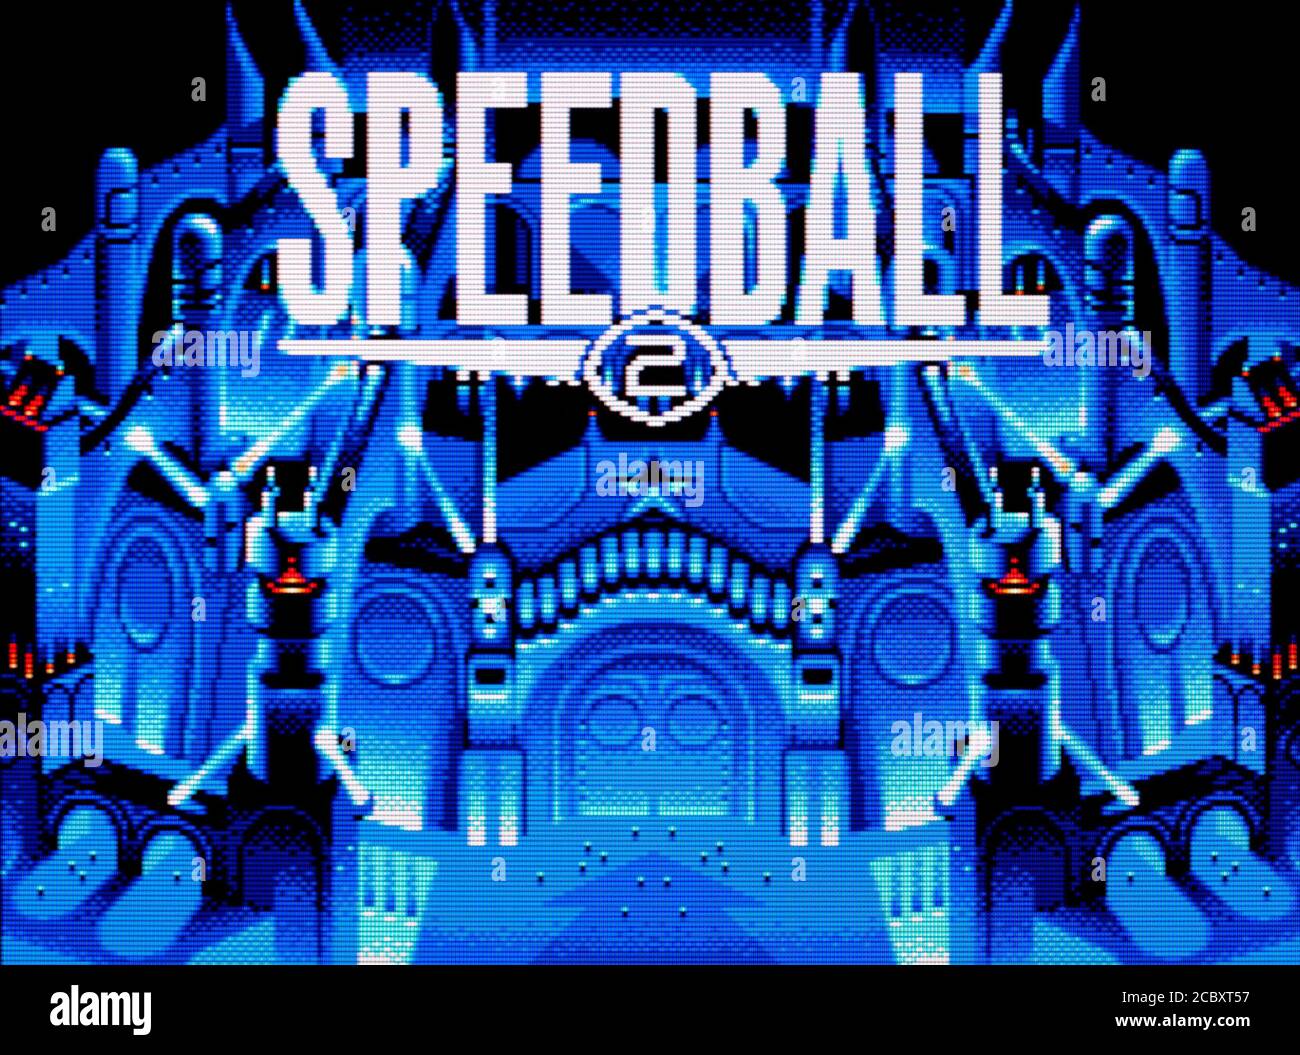 Speedball 2 - Sega Master System - SMS - editorial use only Stock Photo